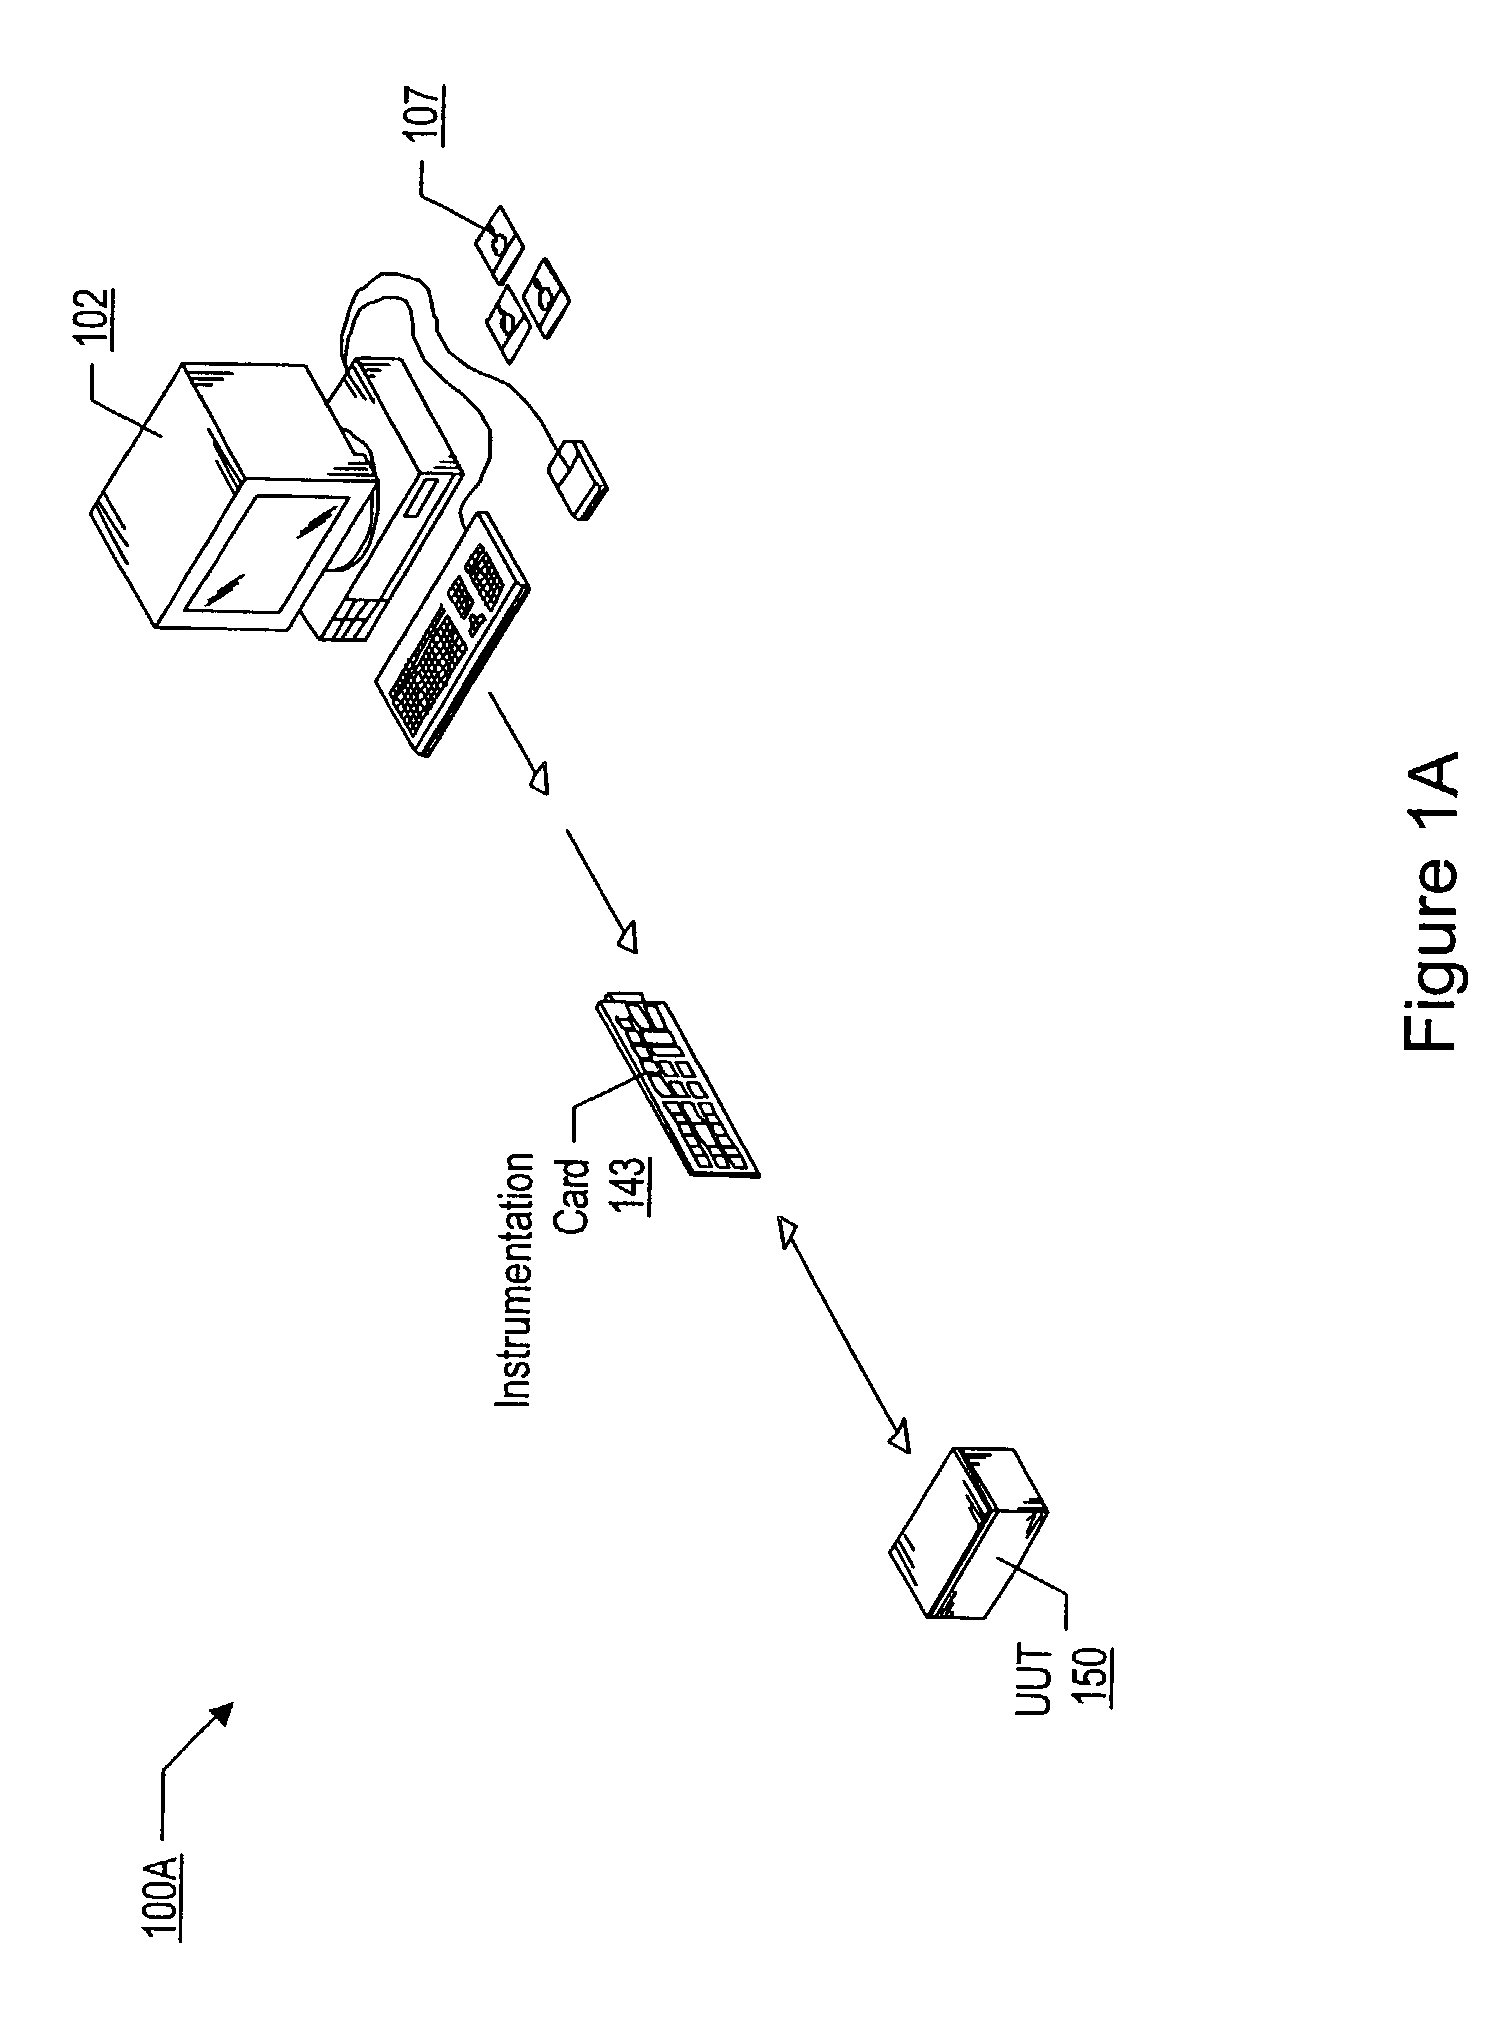 Dynamic routing for a measurement system